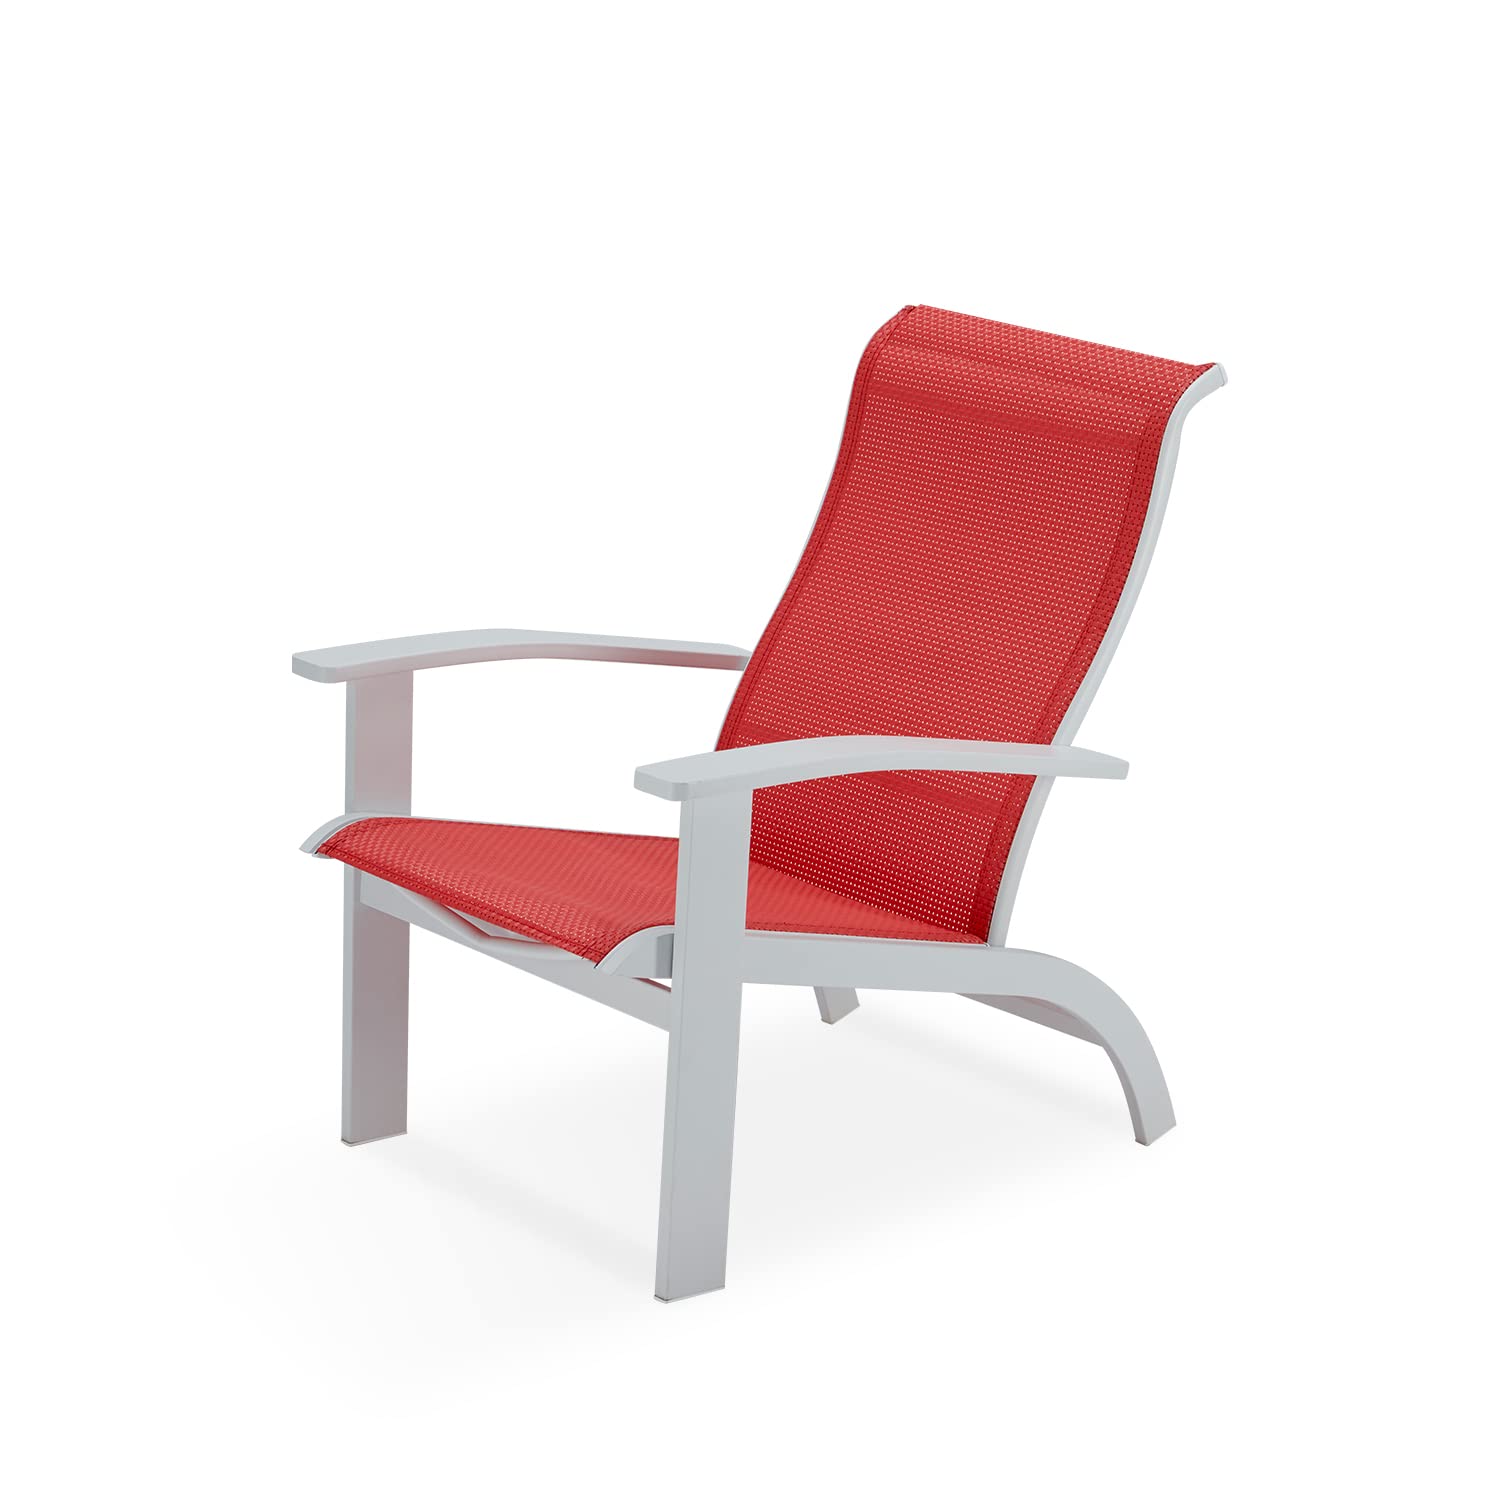 Vicllax Adirondack Chair, Weather-Resistant Outdoor Furniture Lawn Chair